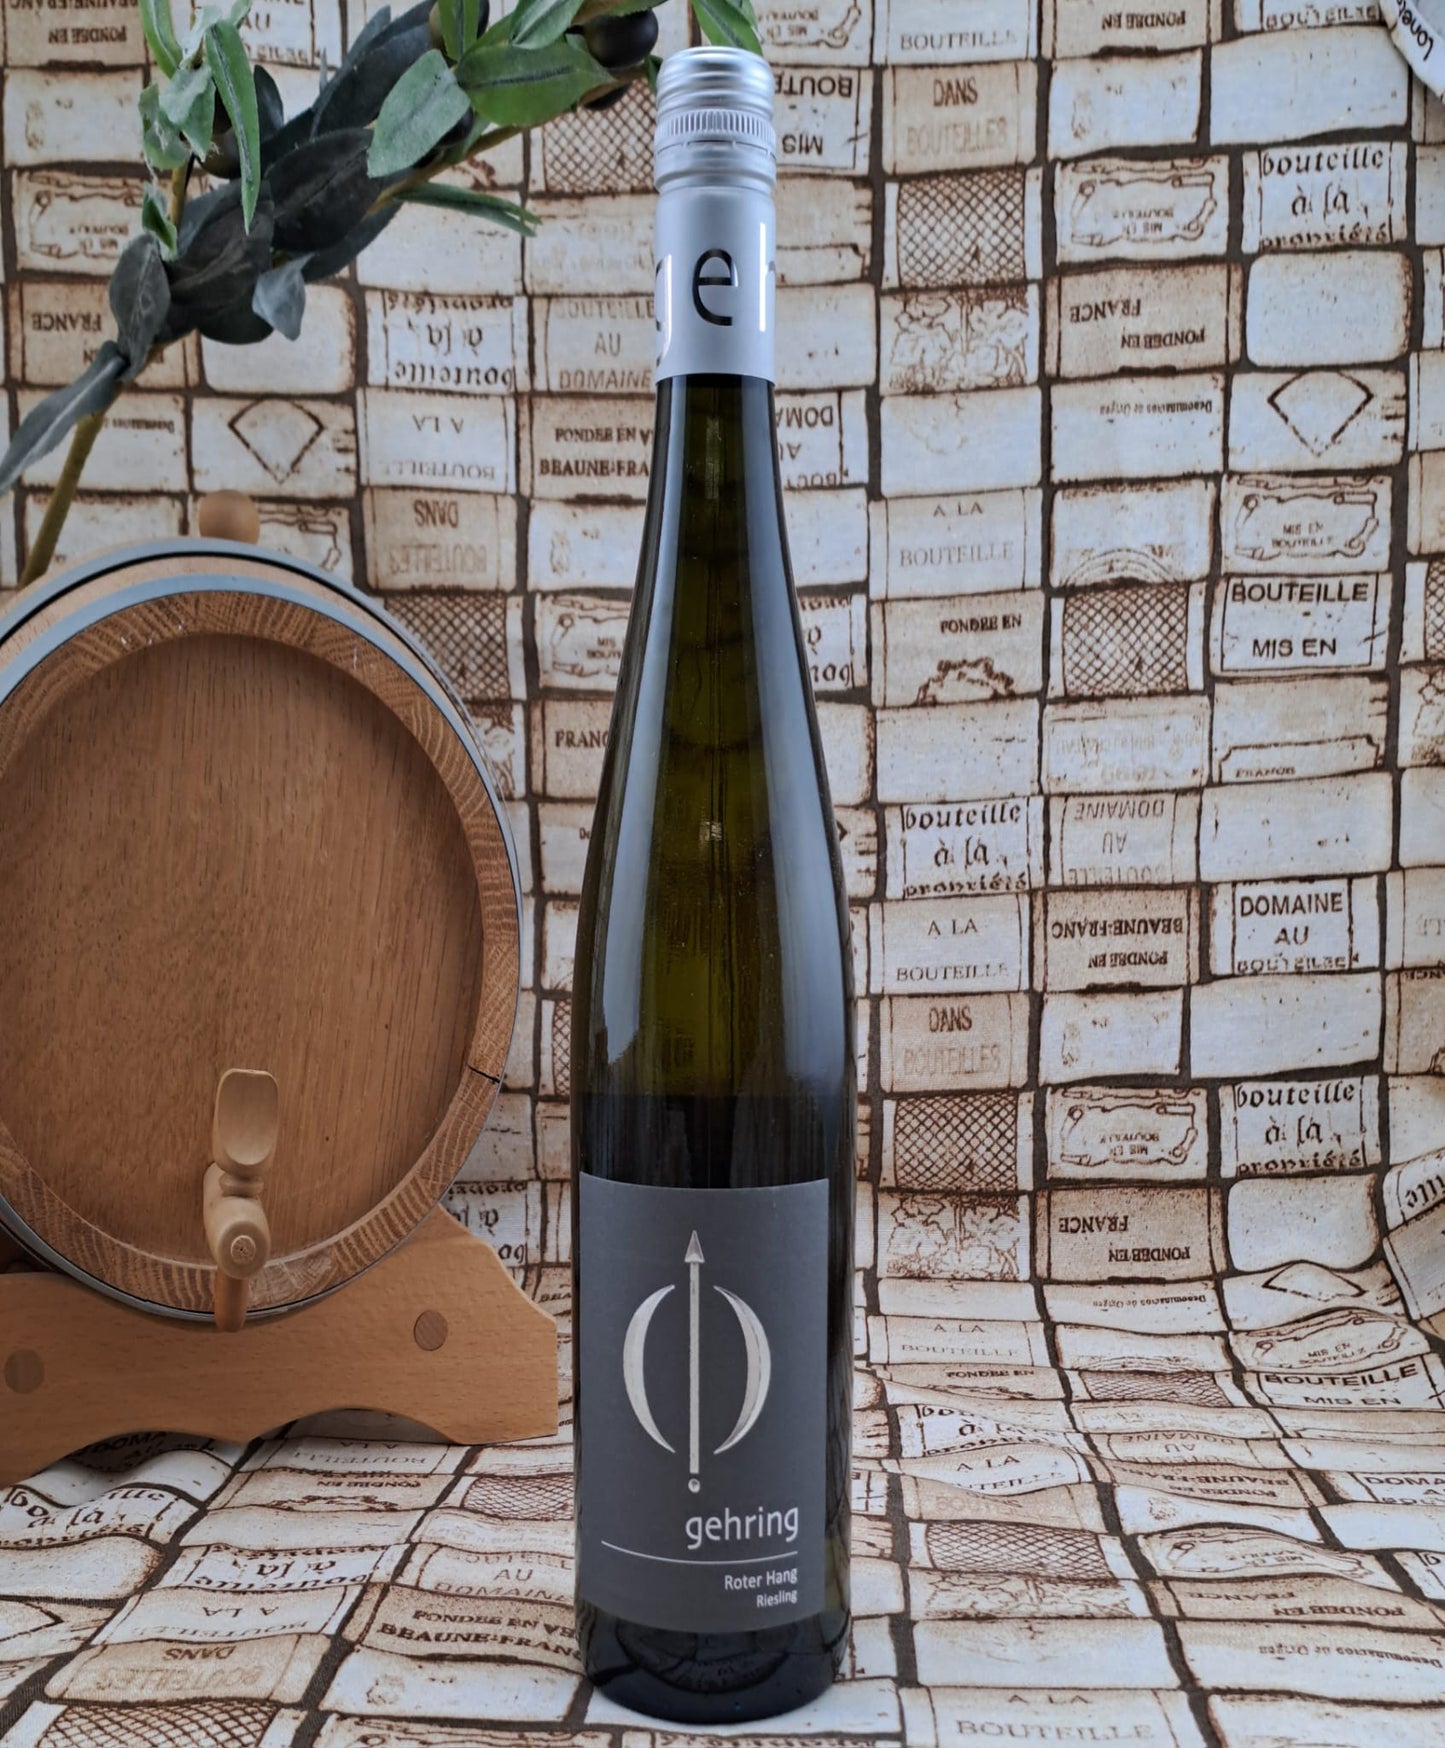 Gehring - Roter Hang Riesling - IsraelWein.de - Christine Awiszus